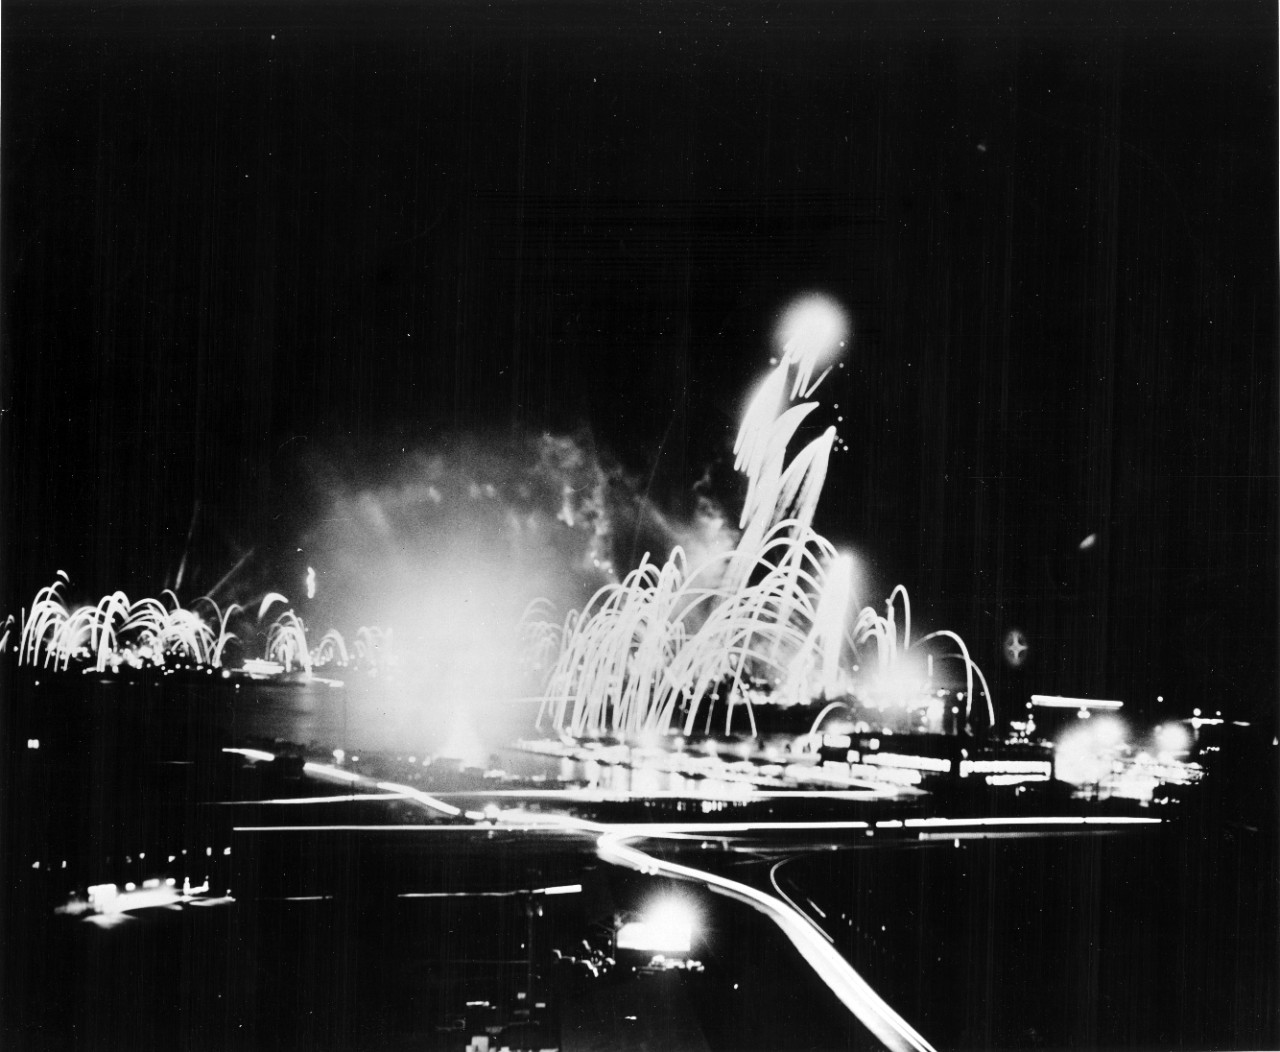 <p>L39-07.03.01 Pearl Harbor Shoots The Works</p><div style="left: -10000px; top: 0px; width: 9000px; height: 16px; overflow: hidden; position: absolute;"><div>&nbsp;</div></div>